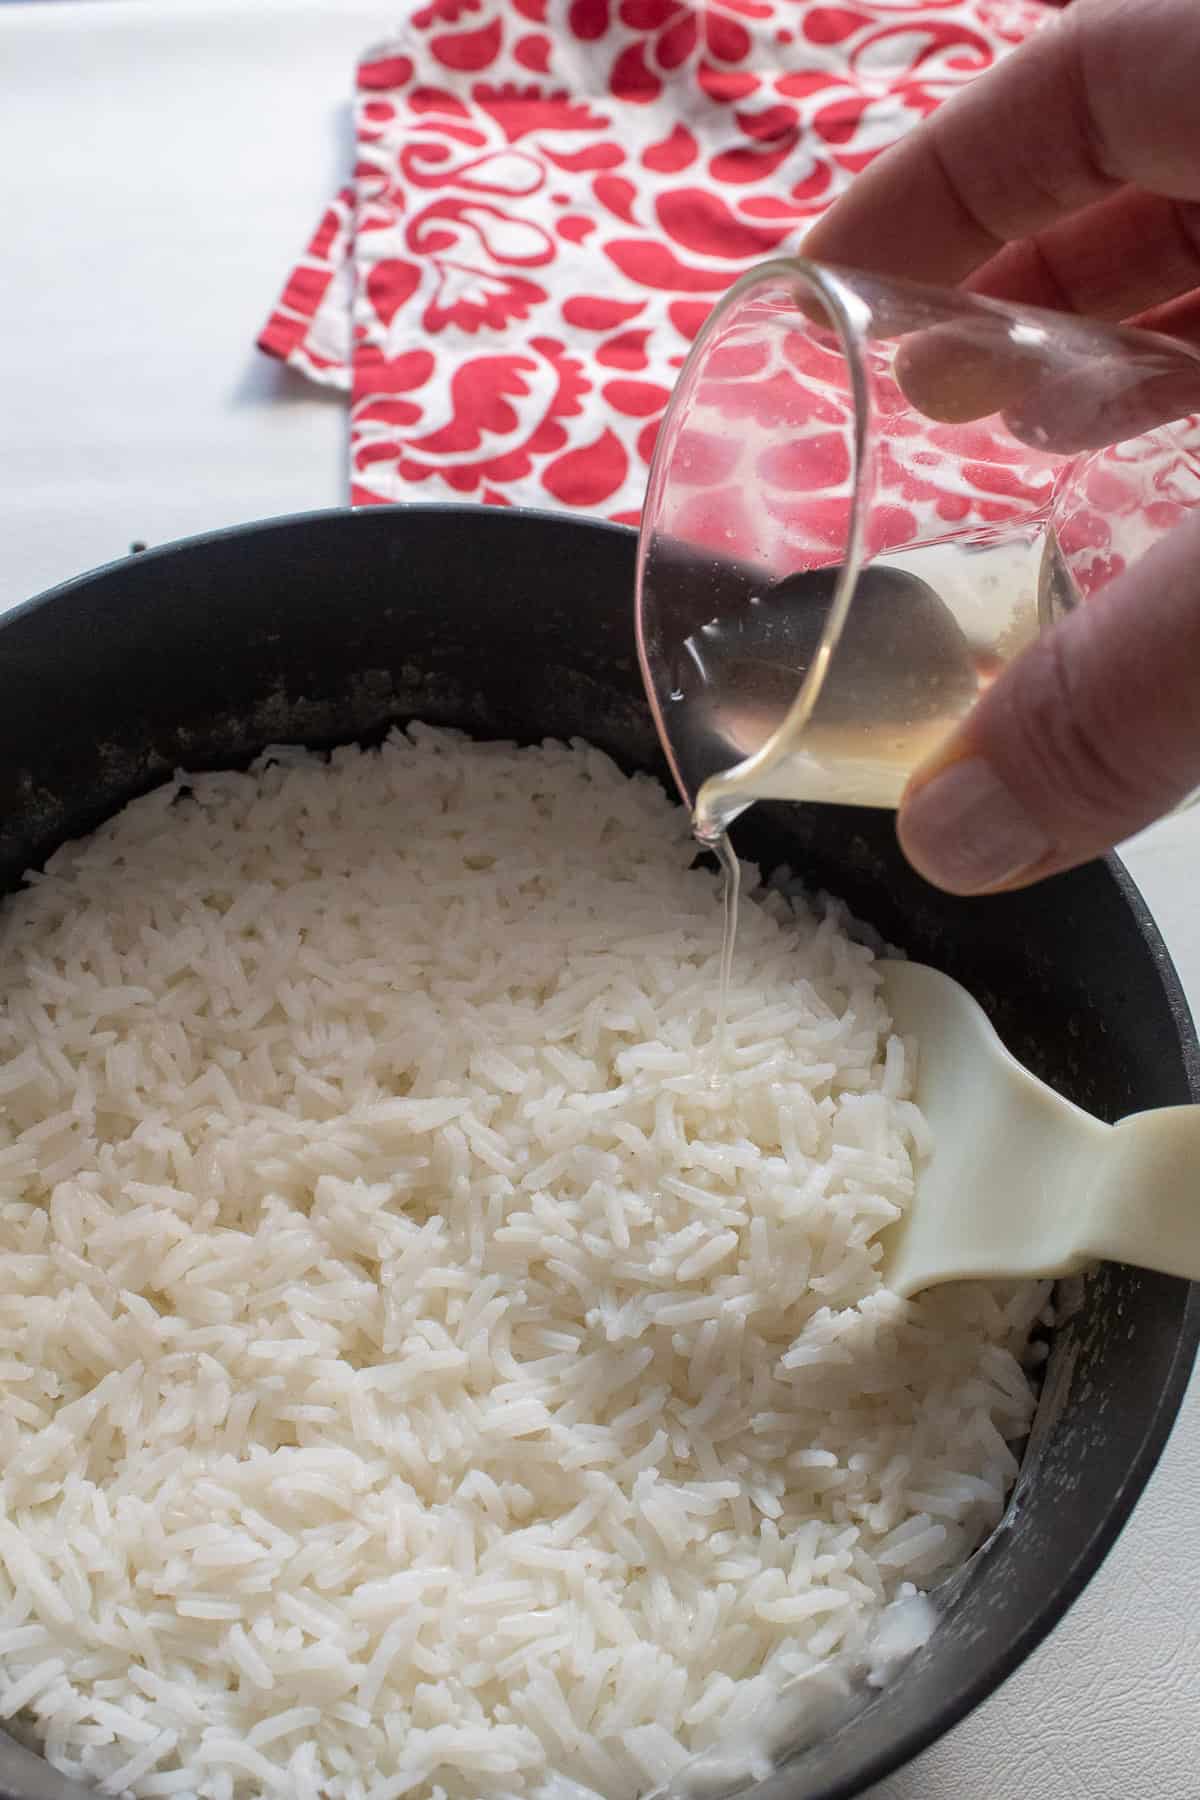 Cooked rice in a saucepan is being seasoned with a mixture of vinegar, salt, and sugar.